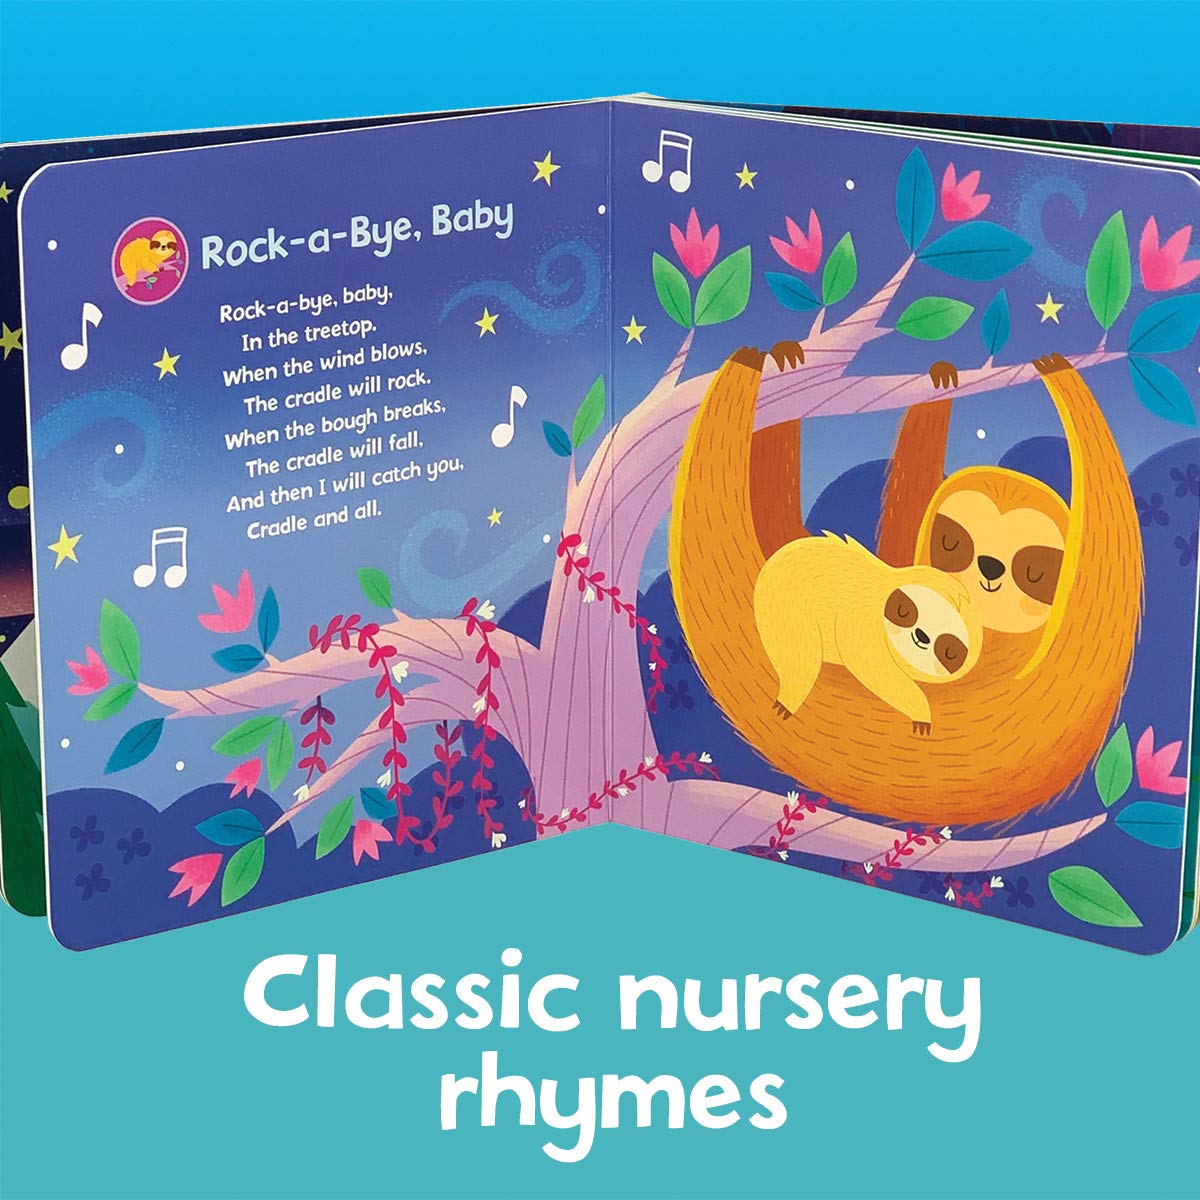 Baby's First Bedtime Songs (Interactive Children's Song Book with 6 Sing-Along Tunes)